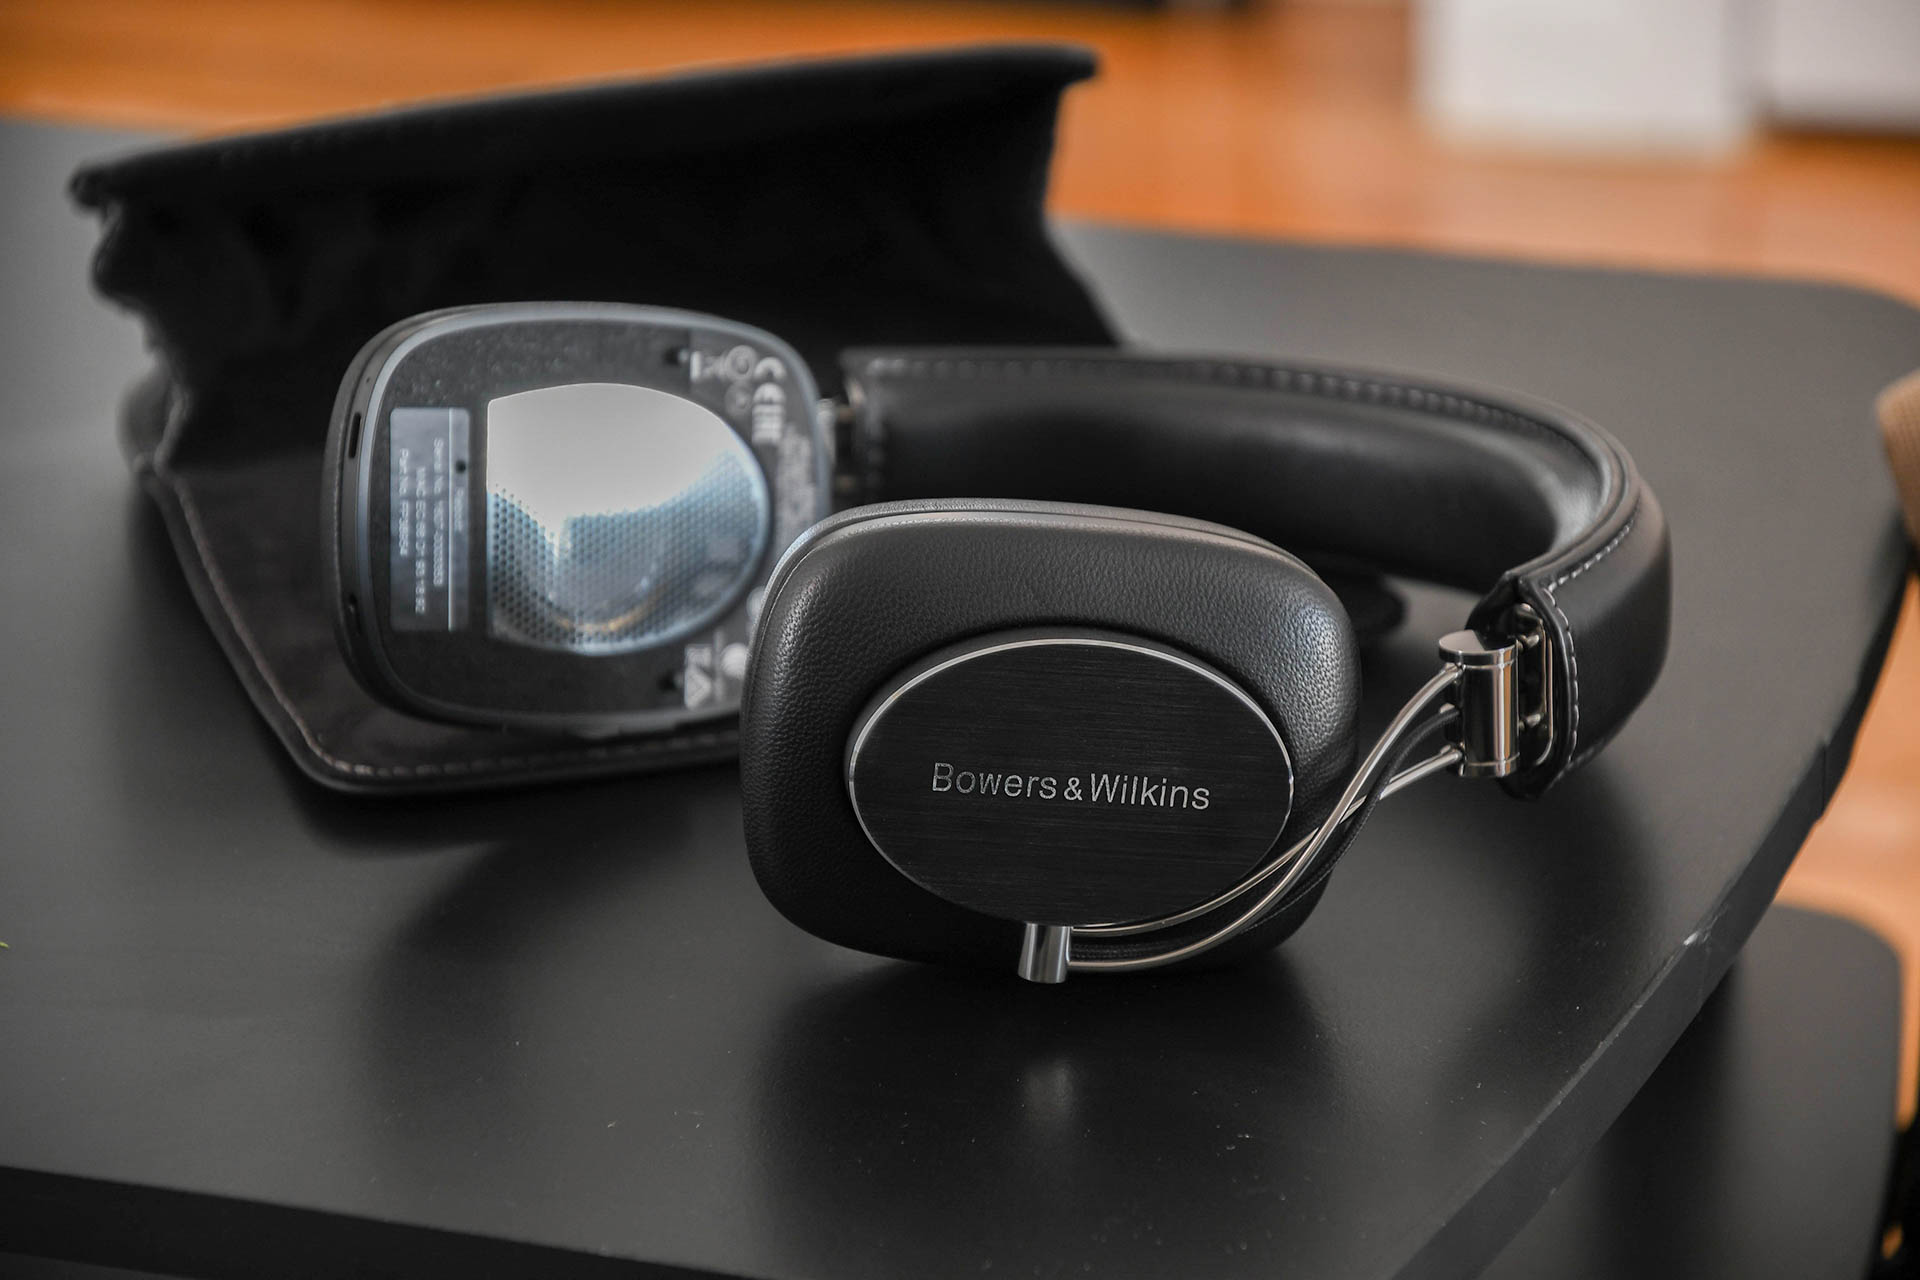 Bowers wilkins p7. Bowers & Wilkins p7 Wireless. Наушники Bowers & Wilkins p7. Bowers & Wilkins p7 Wireless woman. Х7 40d с Bowers and Wilkins.